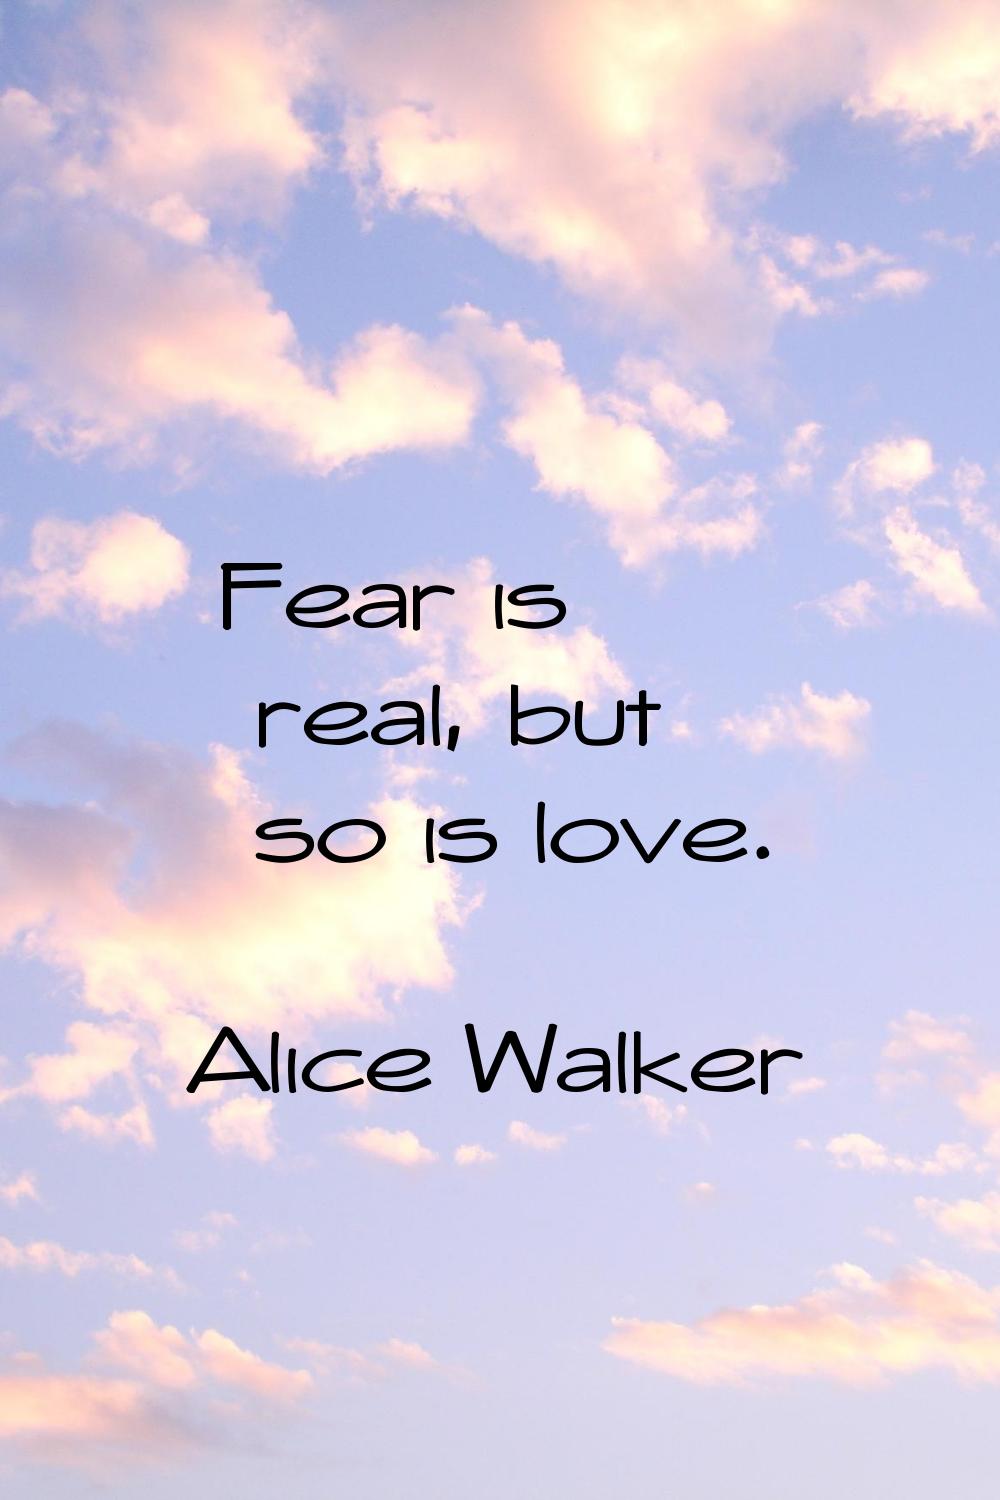 Fear is real, but so is love.